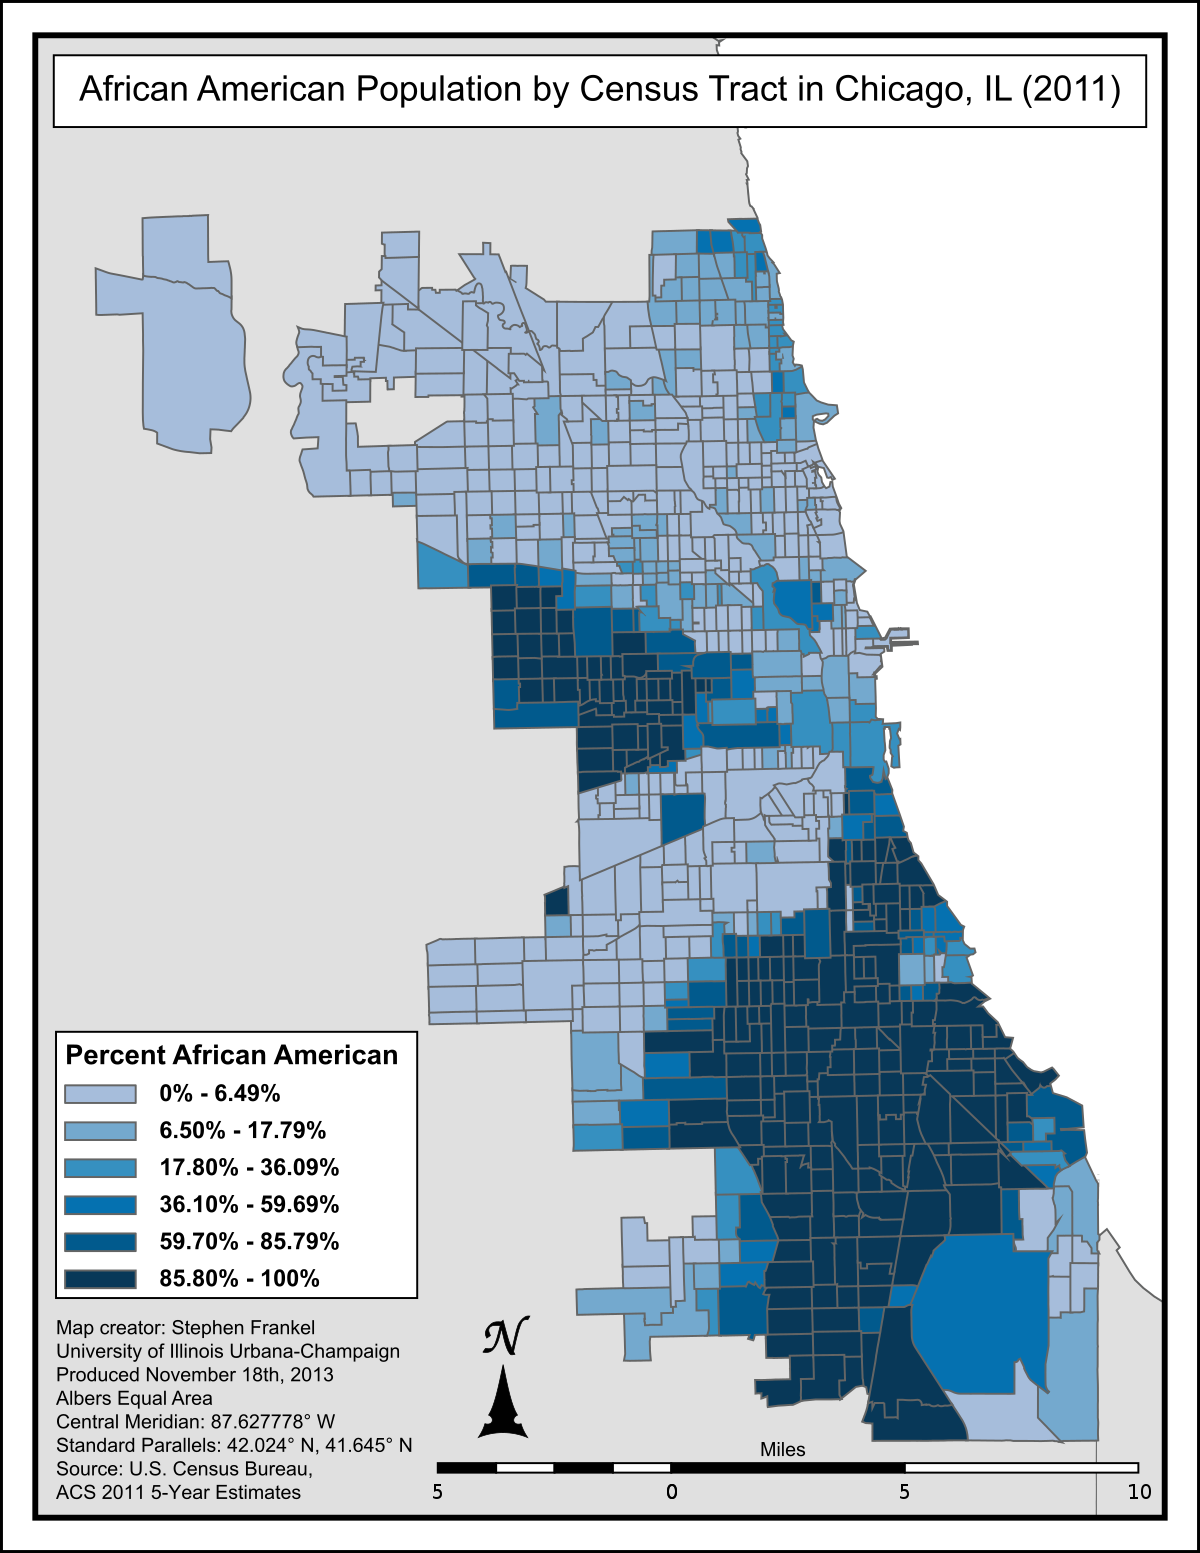 1200px-African_American_Population_by_Census_Tract_in_Chicago%2C_IL_%282011%29.svg.png